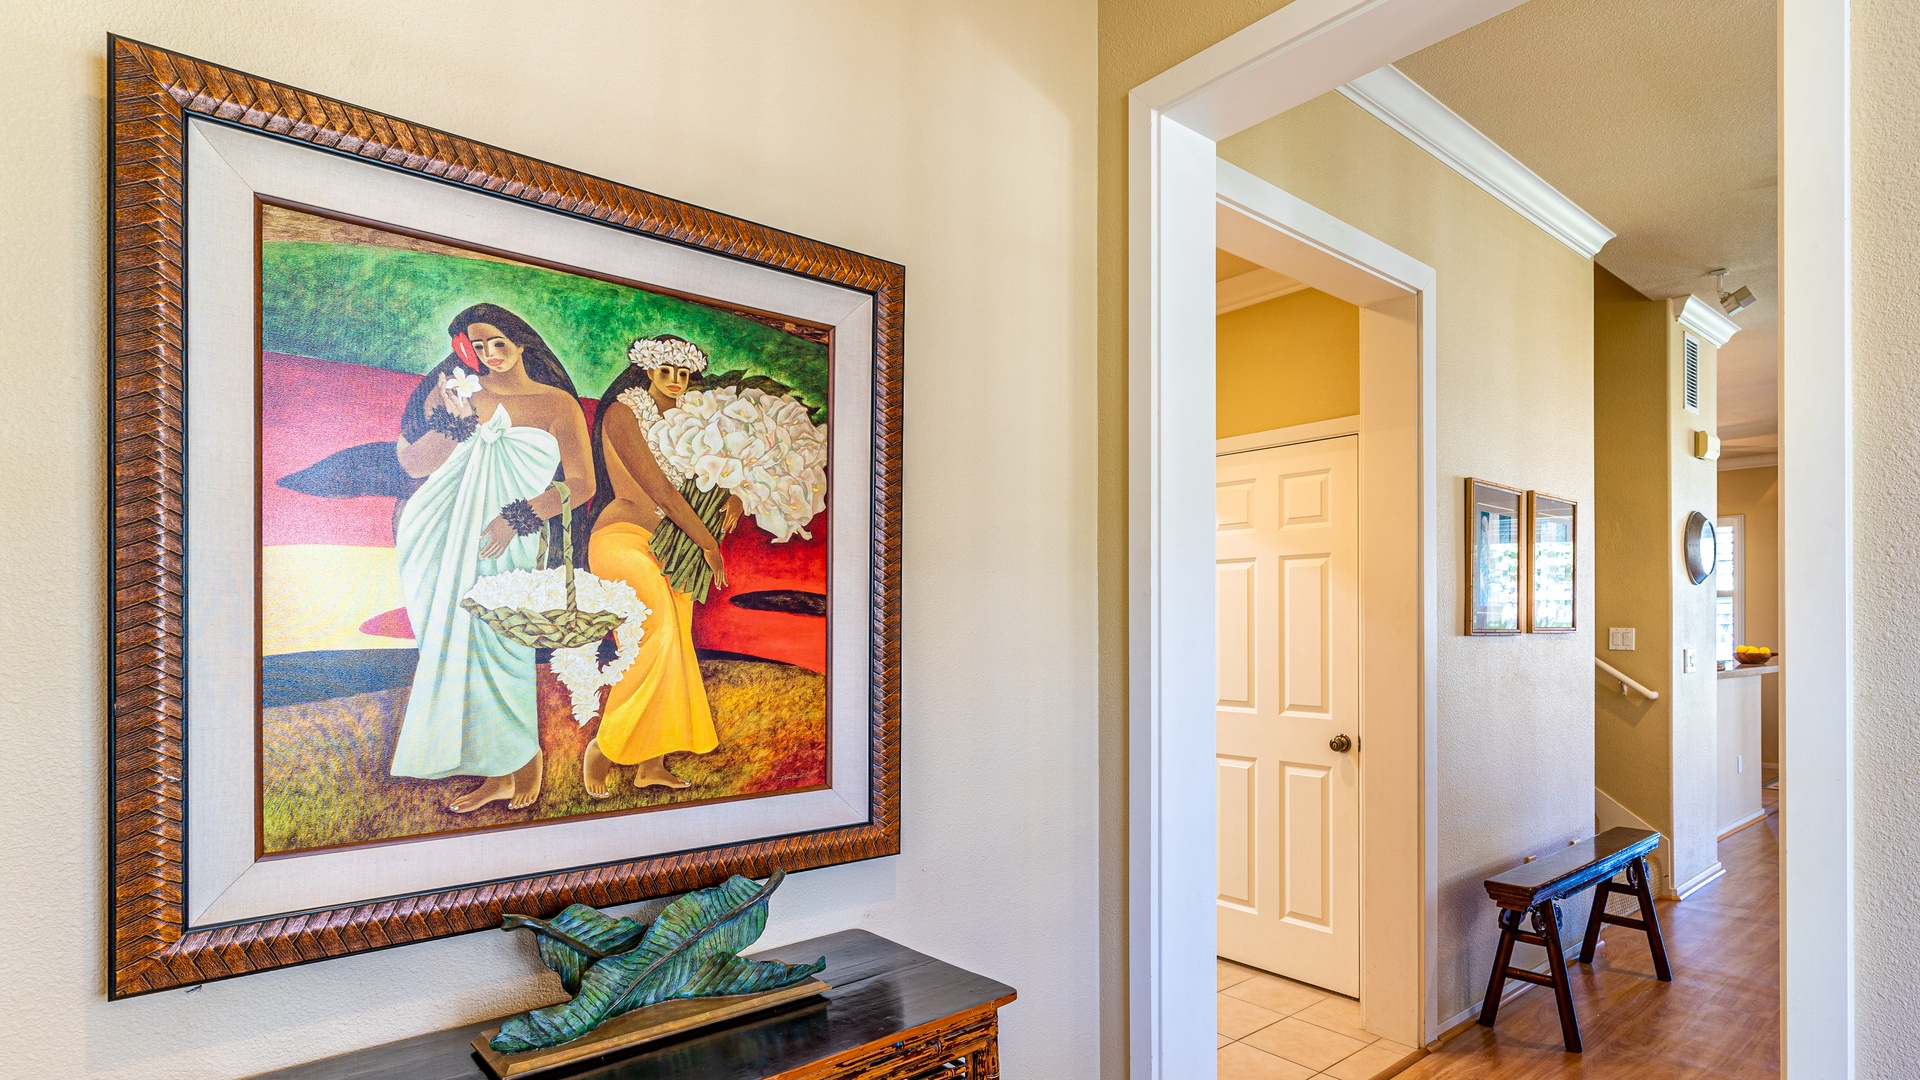 Kapolei Vacation Rentals, Coconut Plantation 1174-2 - The entry of the home with framed art.